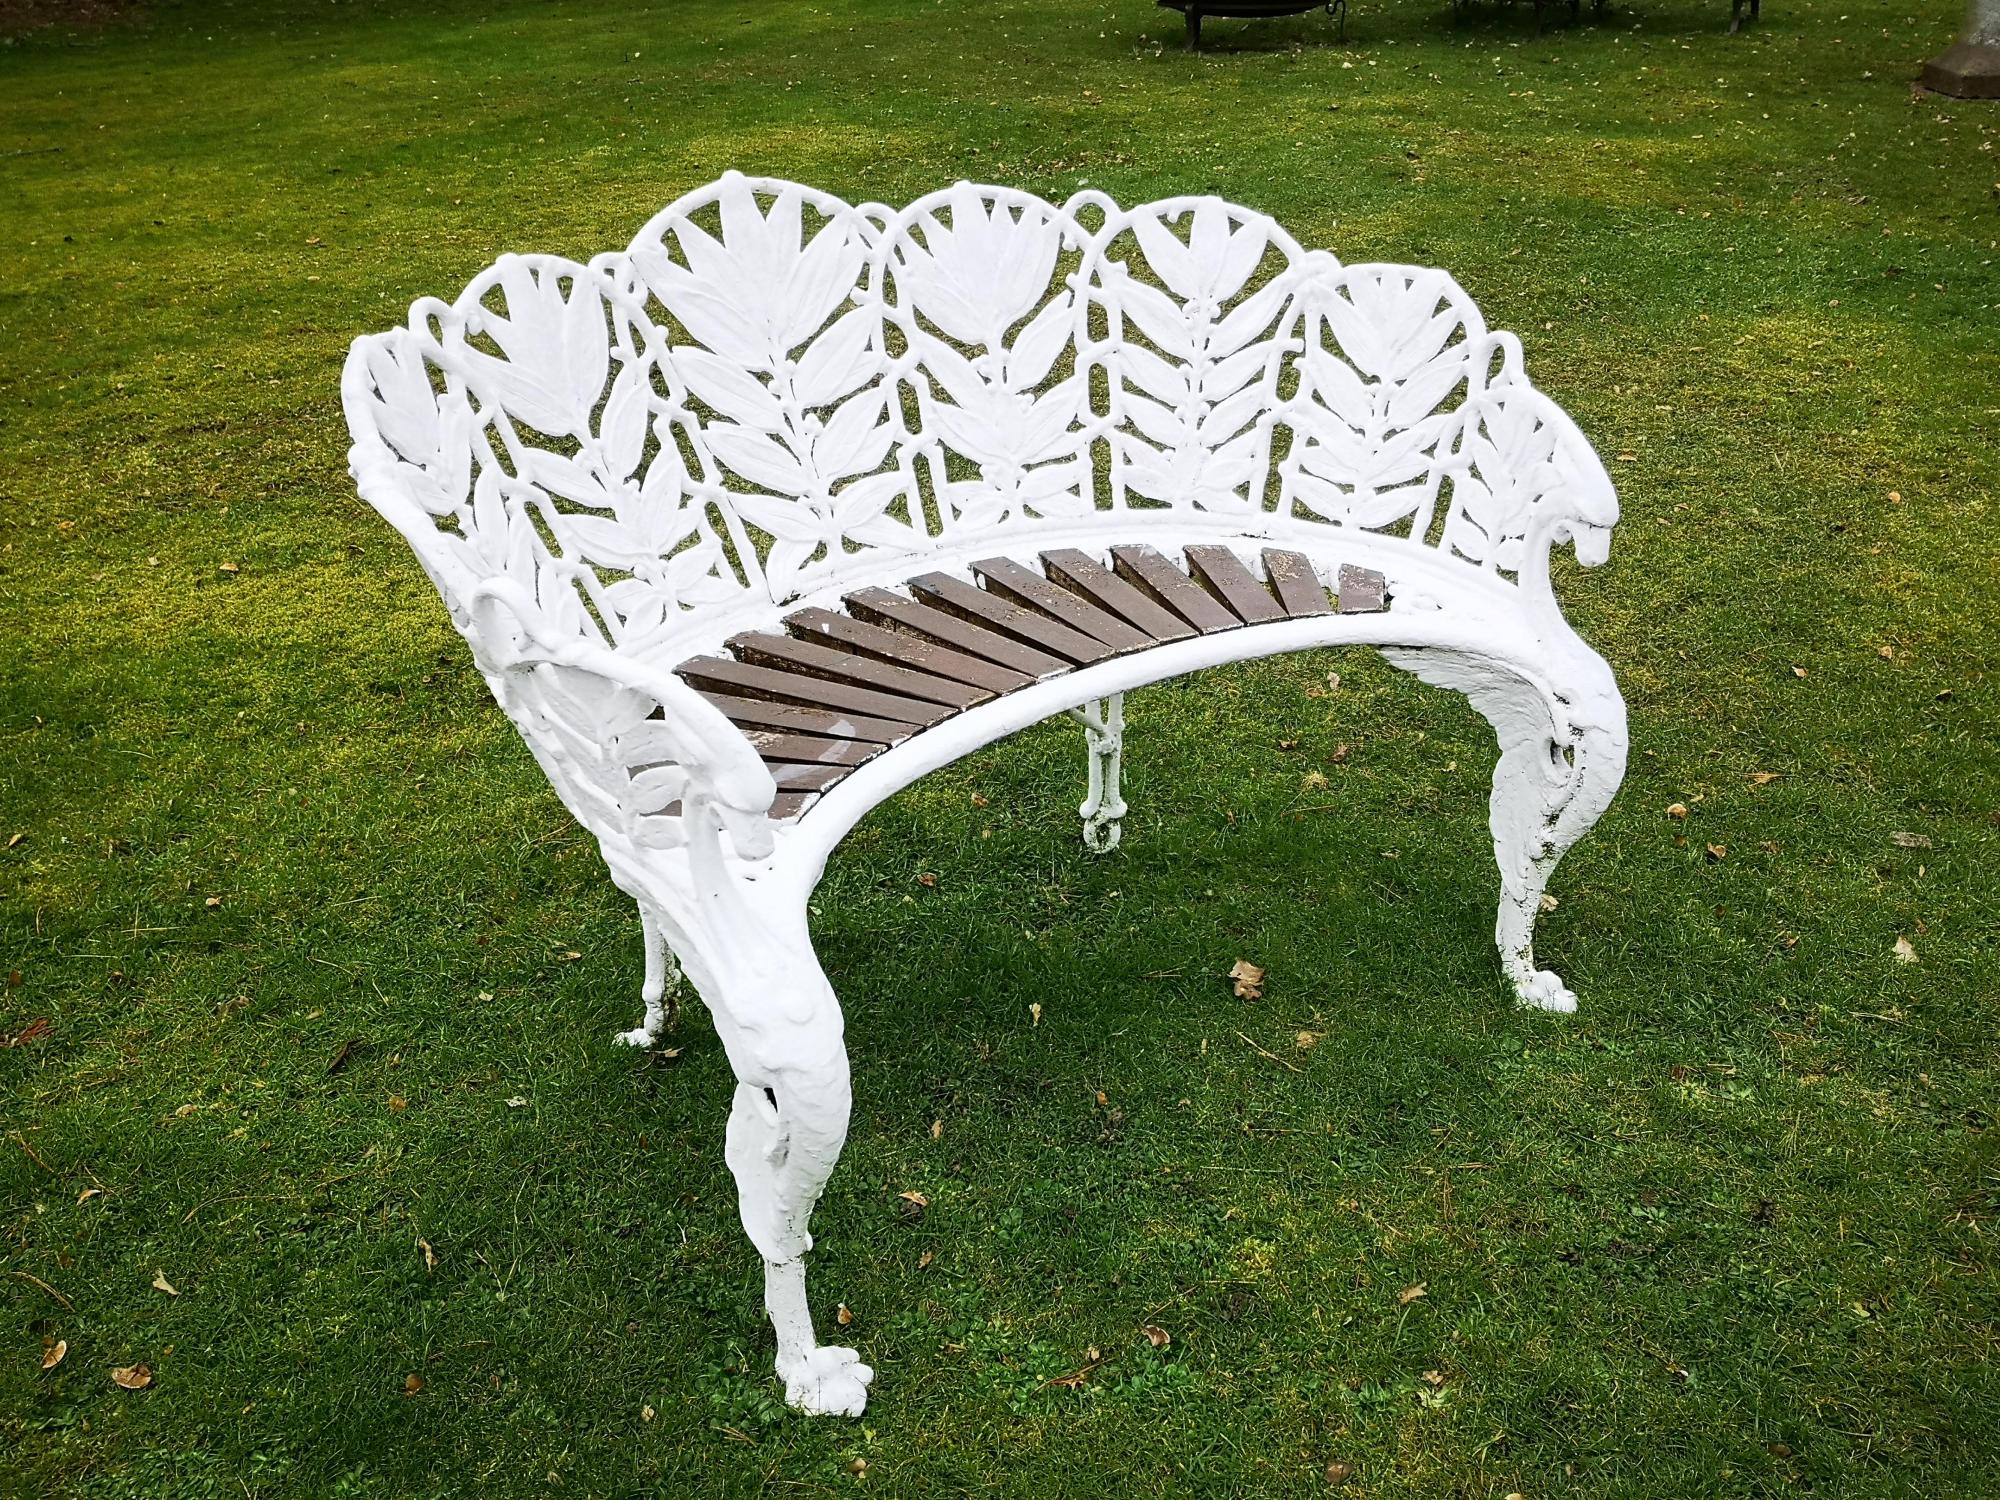 Garden seats: A Coalbrookdale Laurel pattern cast iron seat, circa 1870, foundry marks possibly